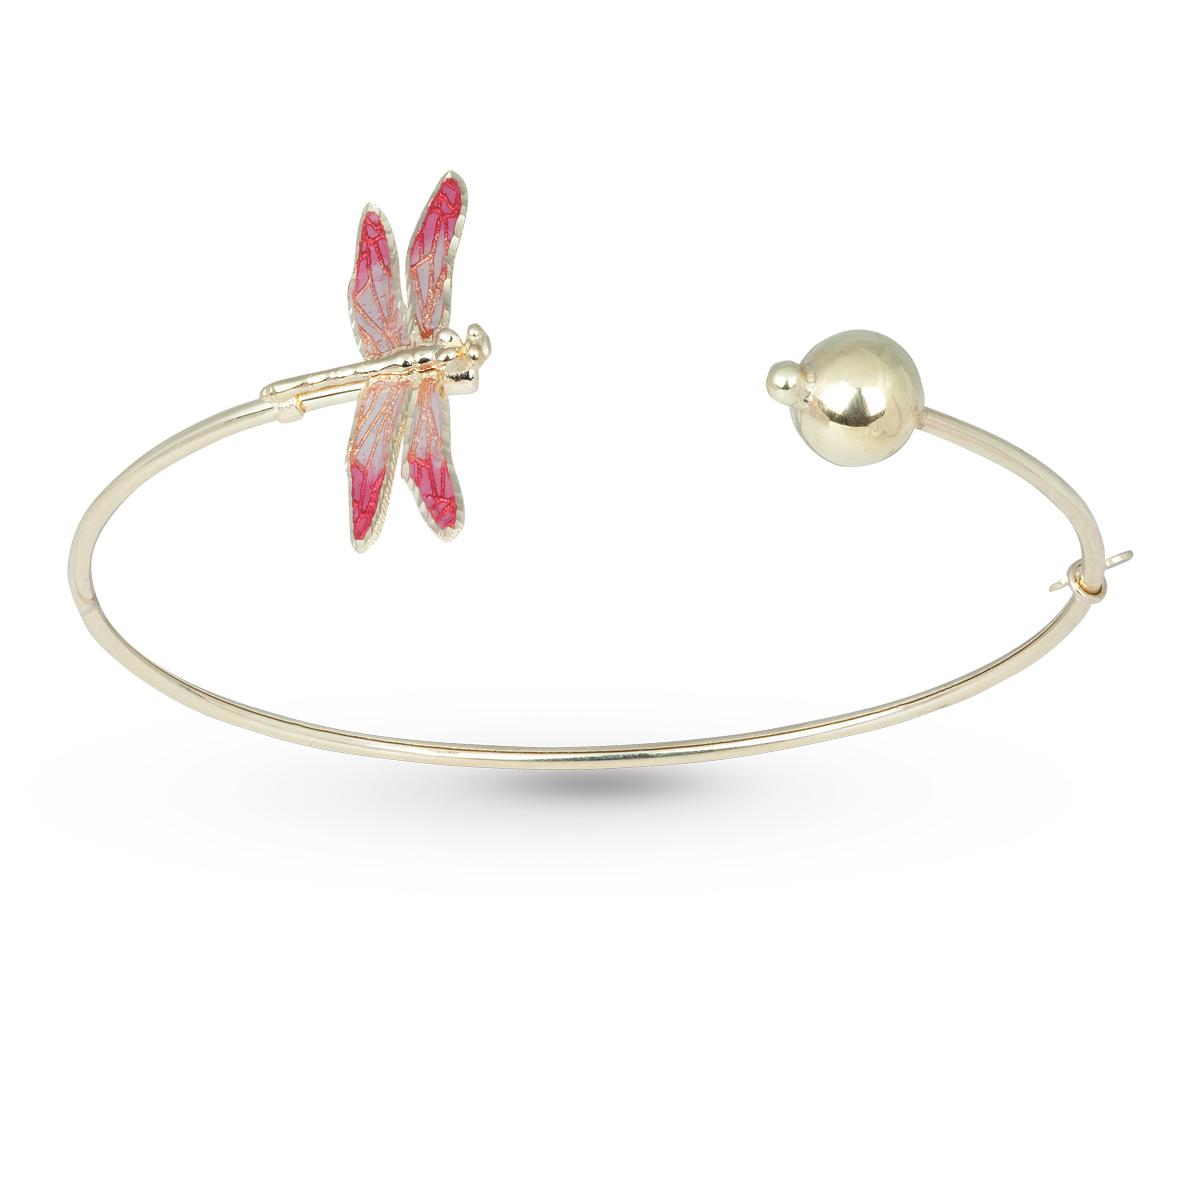 Flexible Dragonfly bracelet in 18kt yellow gold, cathedral enamel - BCA568-MG